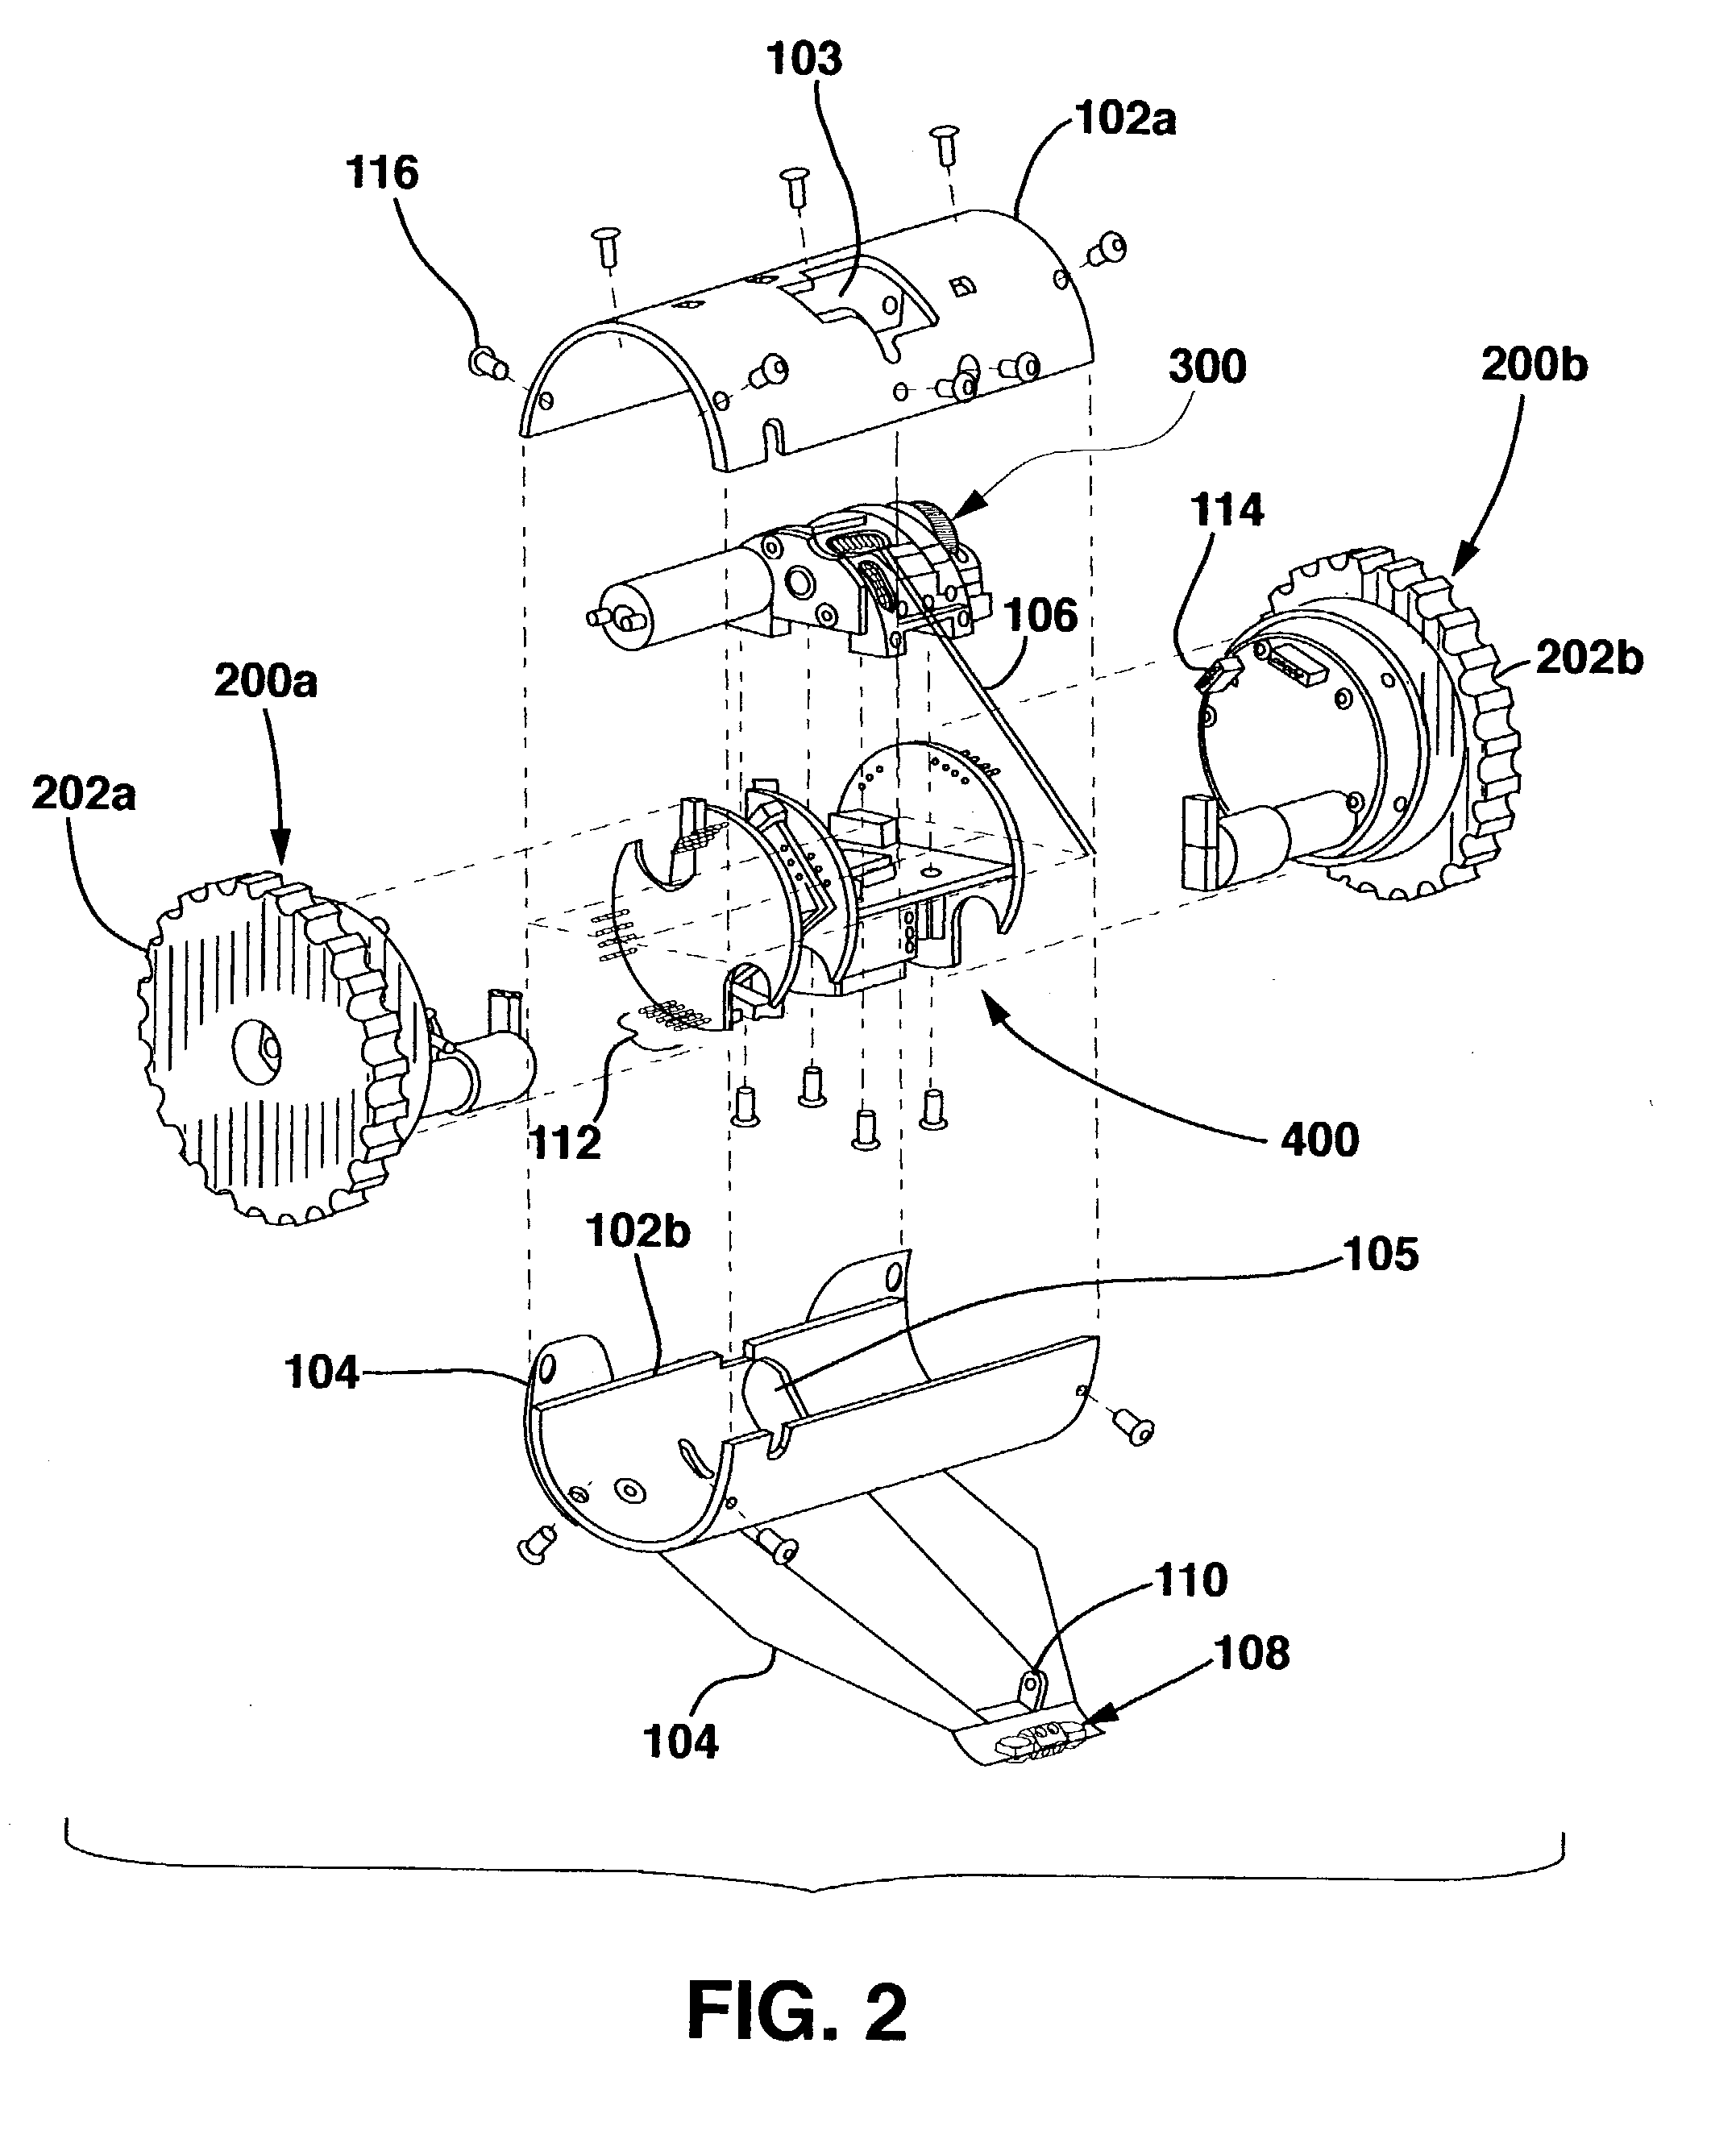 Miniature robotic vehicles and methods of controlling same